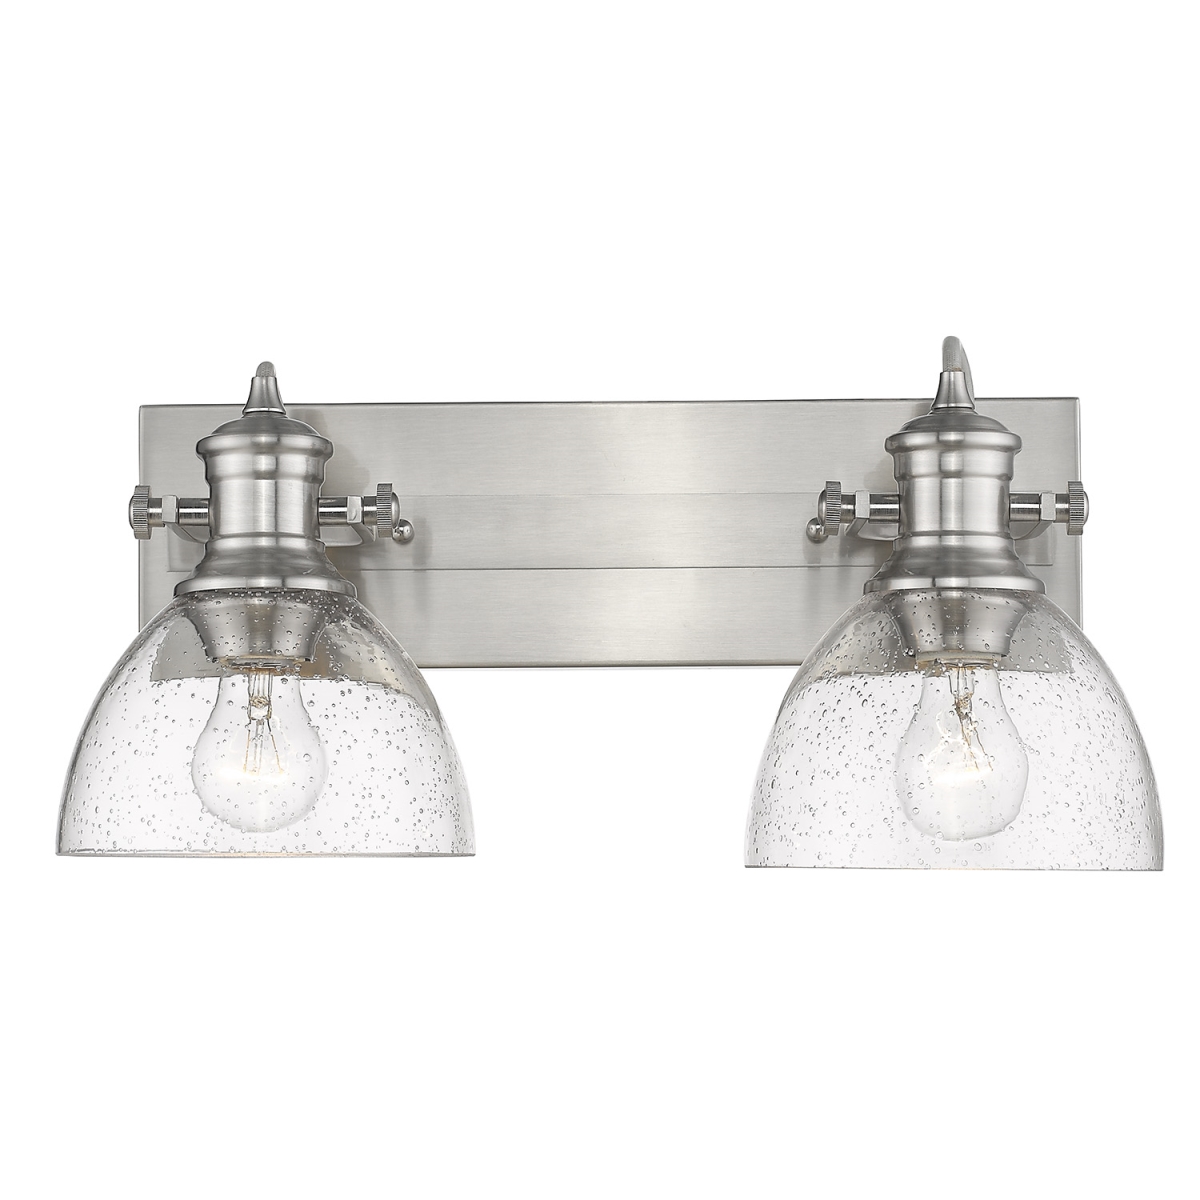 3118-ba2 Pw-sd 18 In. Hines 2 Lights Pewter Bath Fixture Wall Light With Seeded Glass, Silver